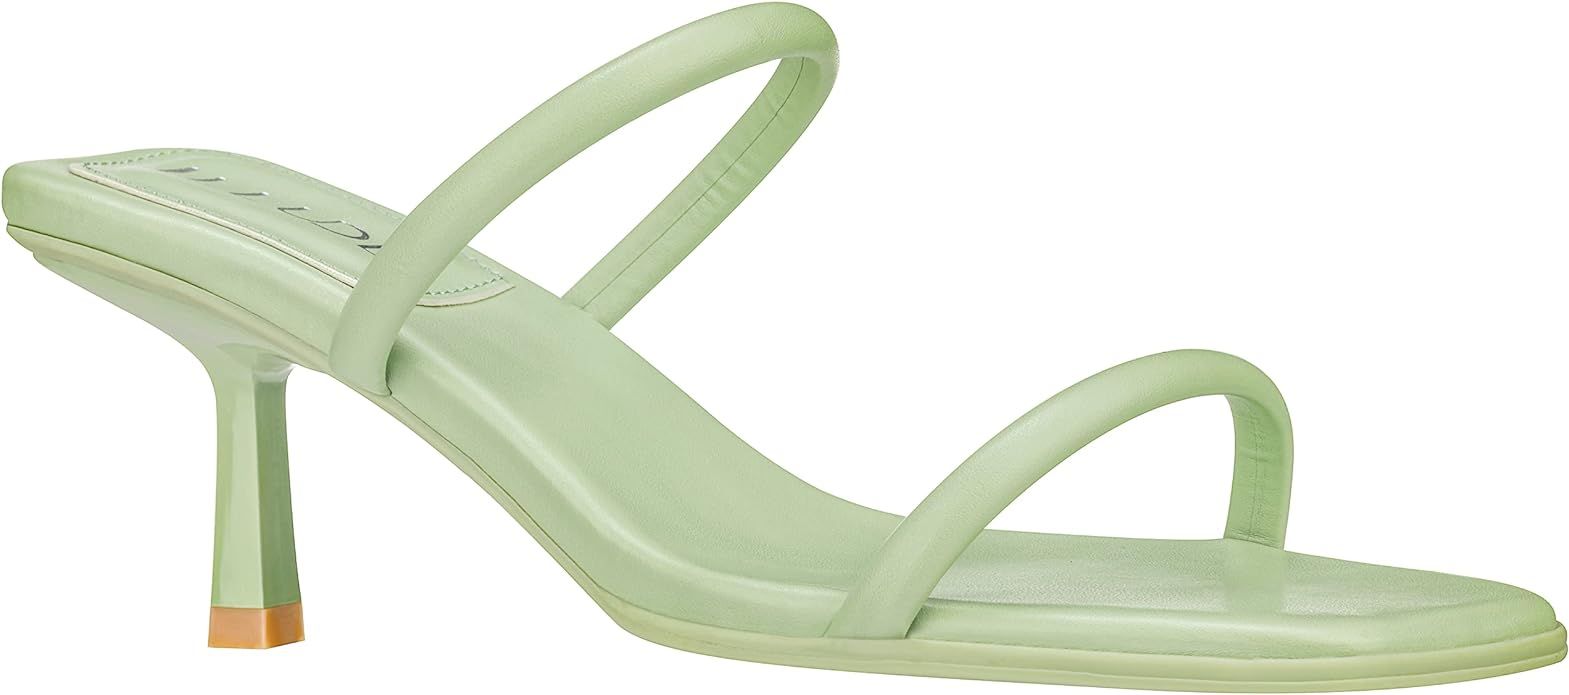 ILLUDE Women's Mules Square Toe Two Strap Low Heeled Sandals | Amazon (US)